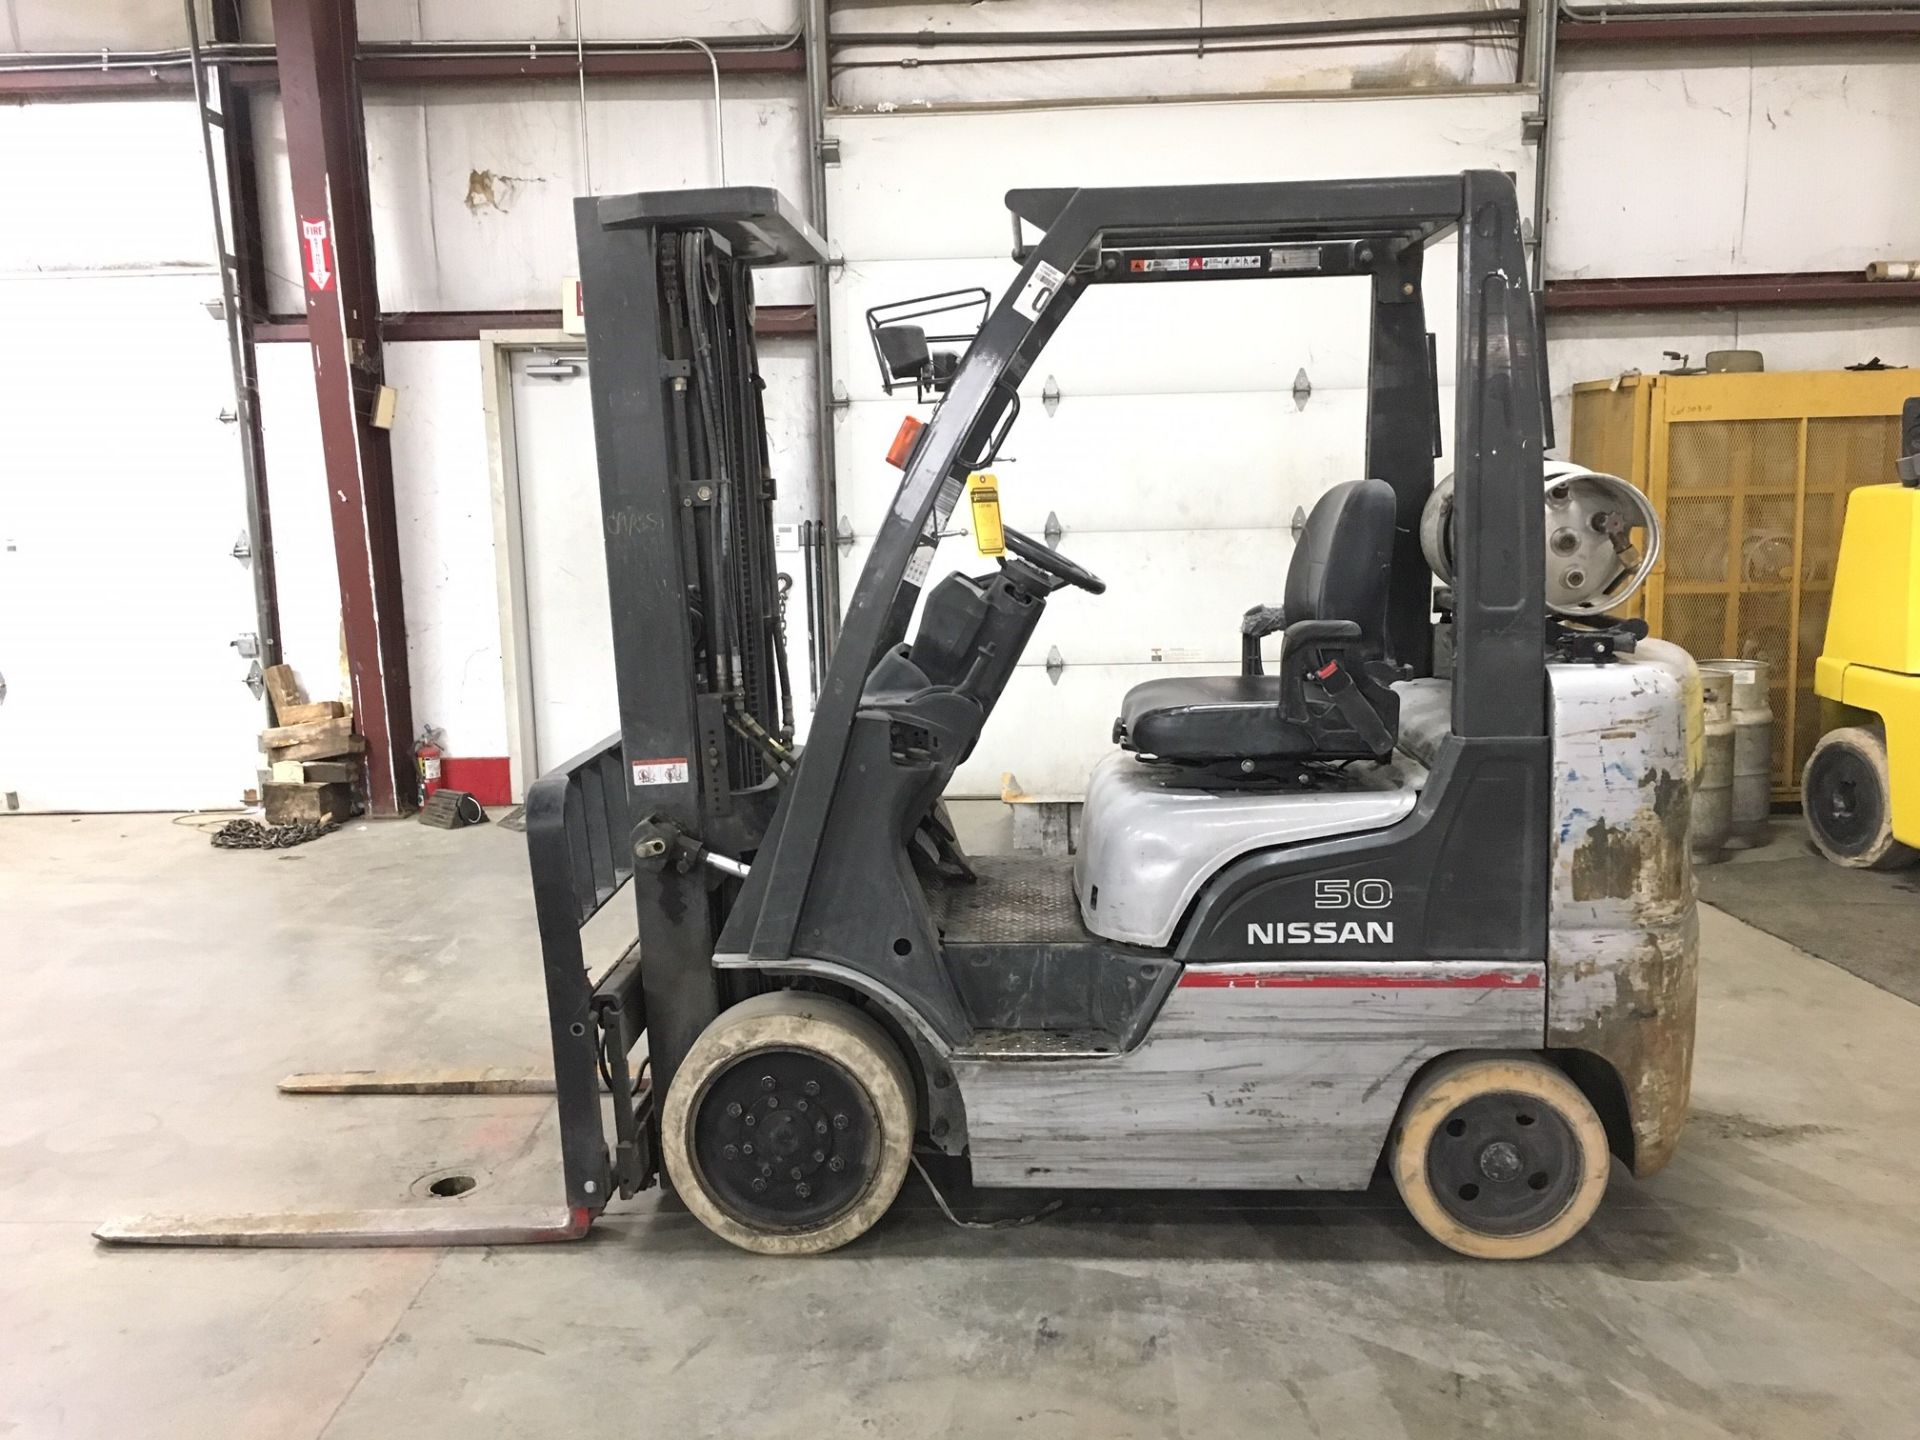 ***LOCATED IN HAMILTON, OHIO** 2007 NISSAN 5,000-LB. FORKLIFT, MOD: MCPL02A25LV, 3-STAGE, SIDESHIFT